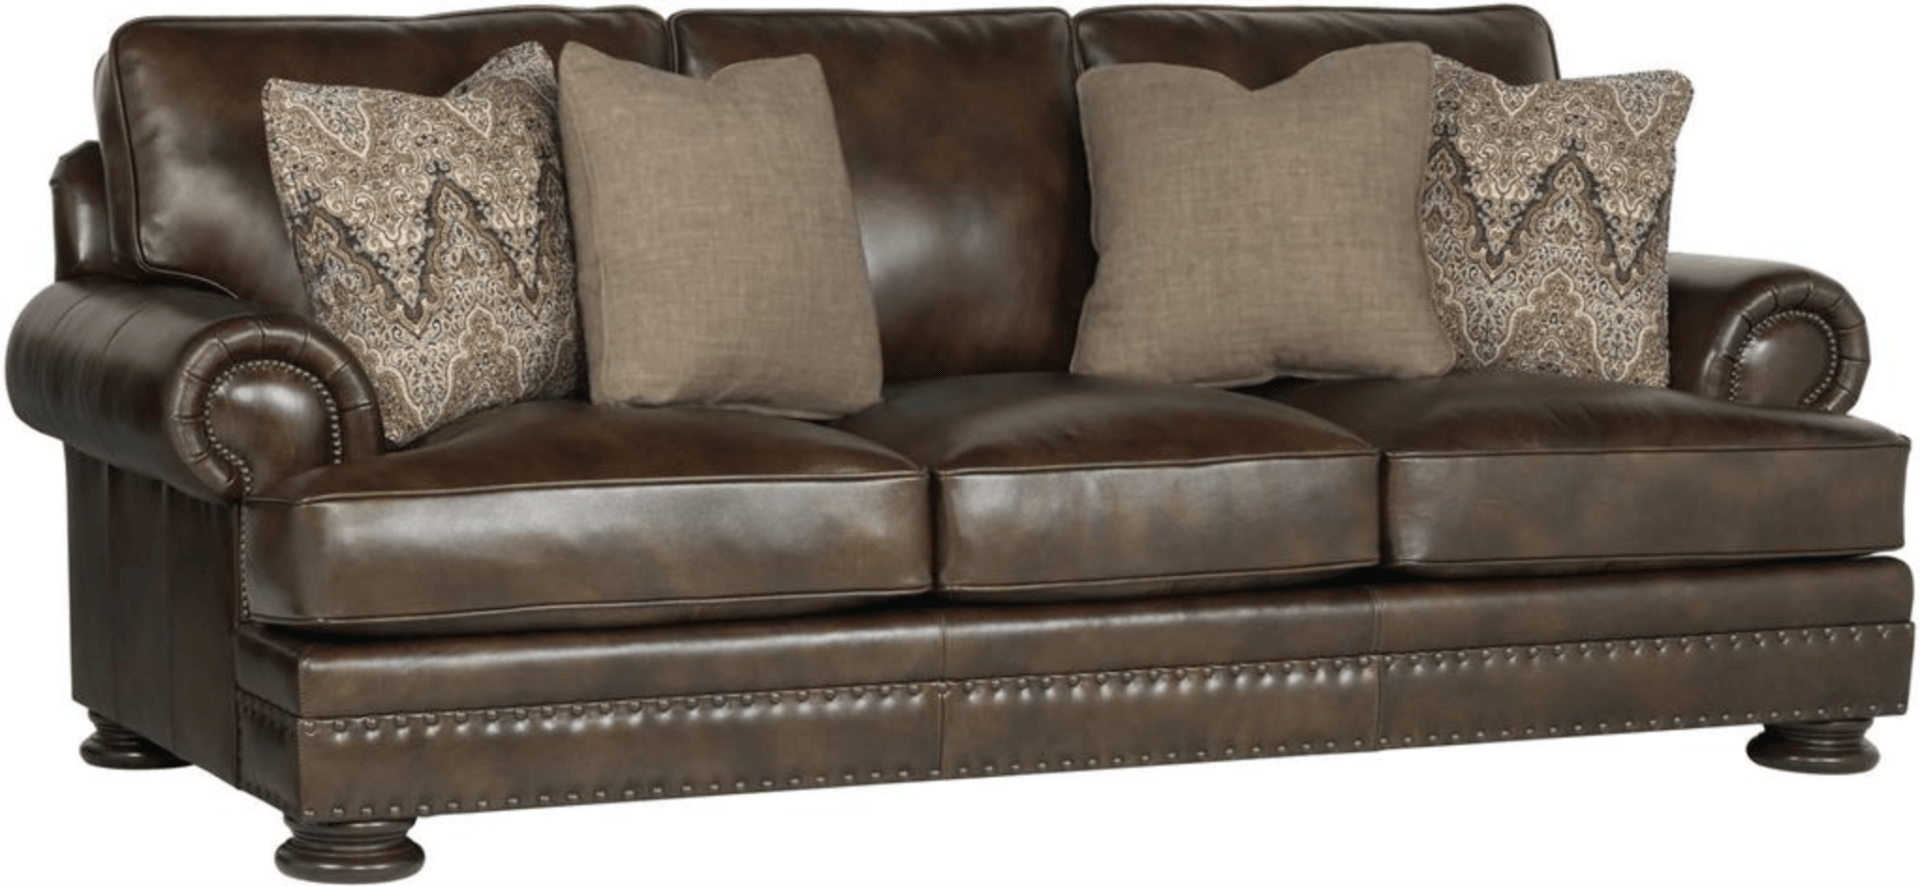 a brown leather couch with two pillows on it on a white background .